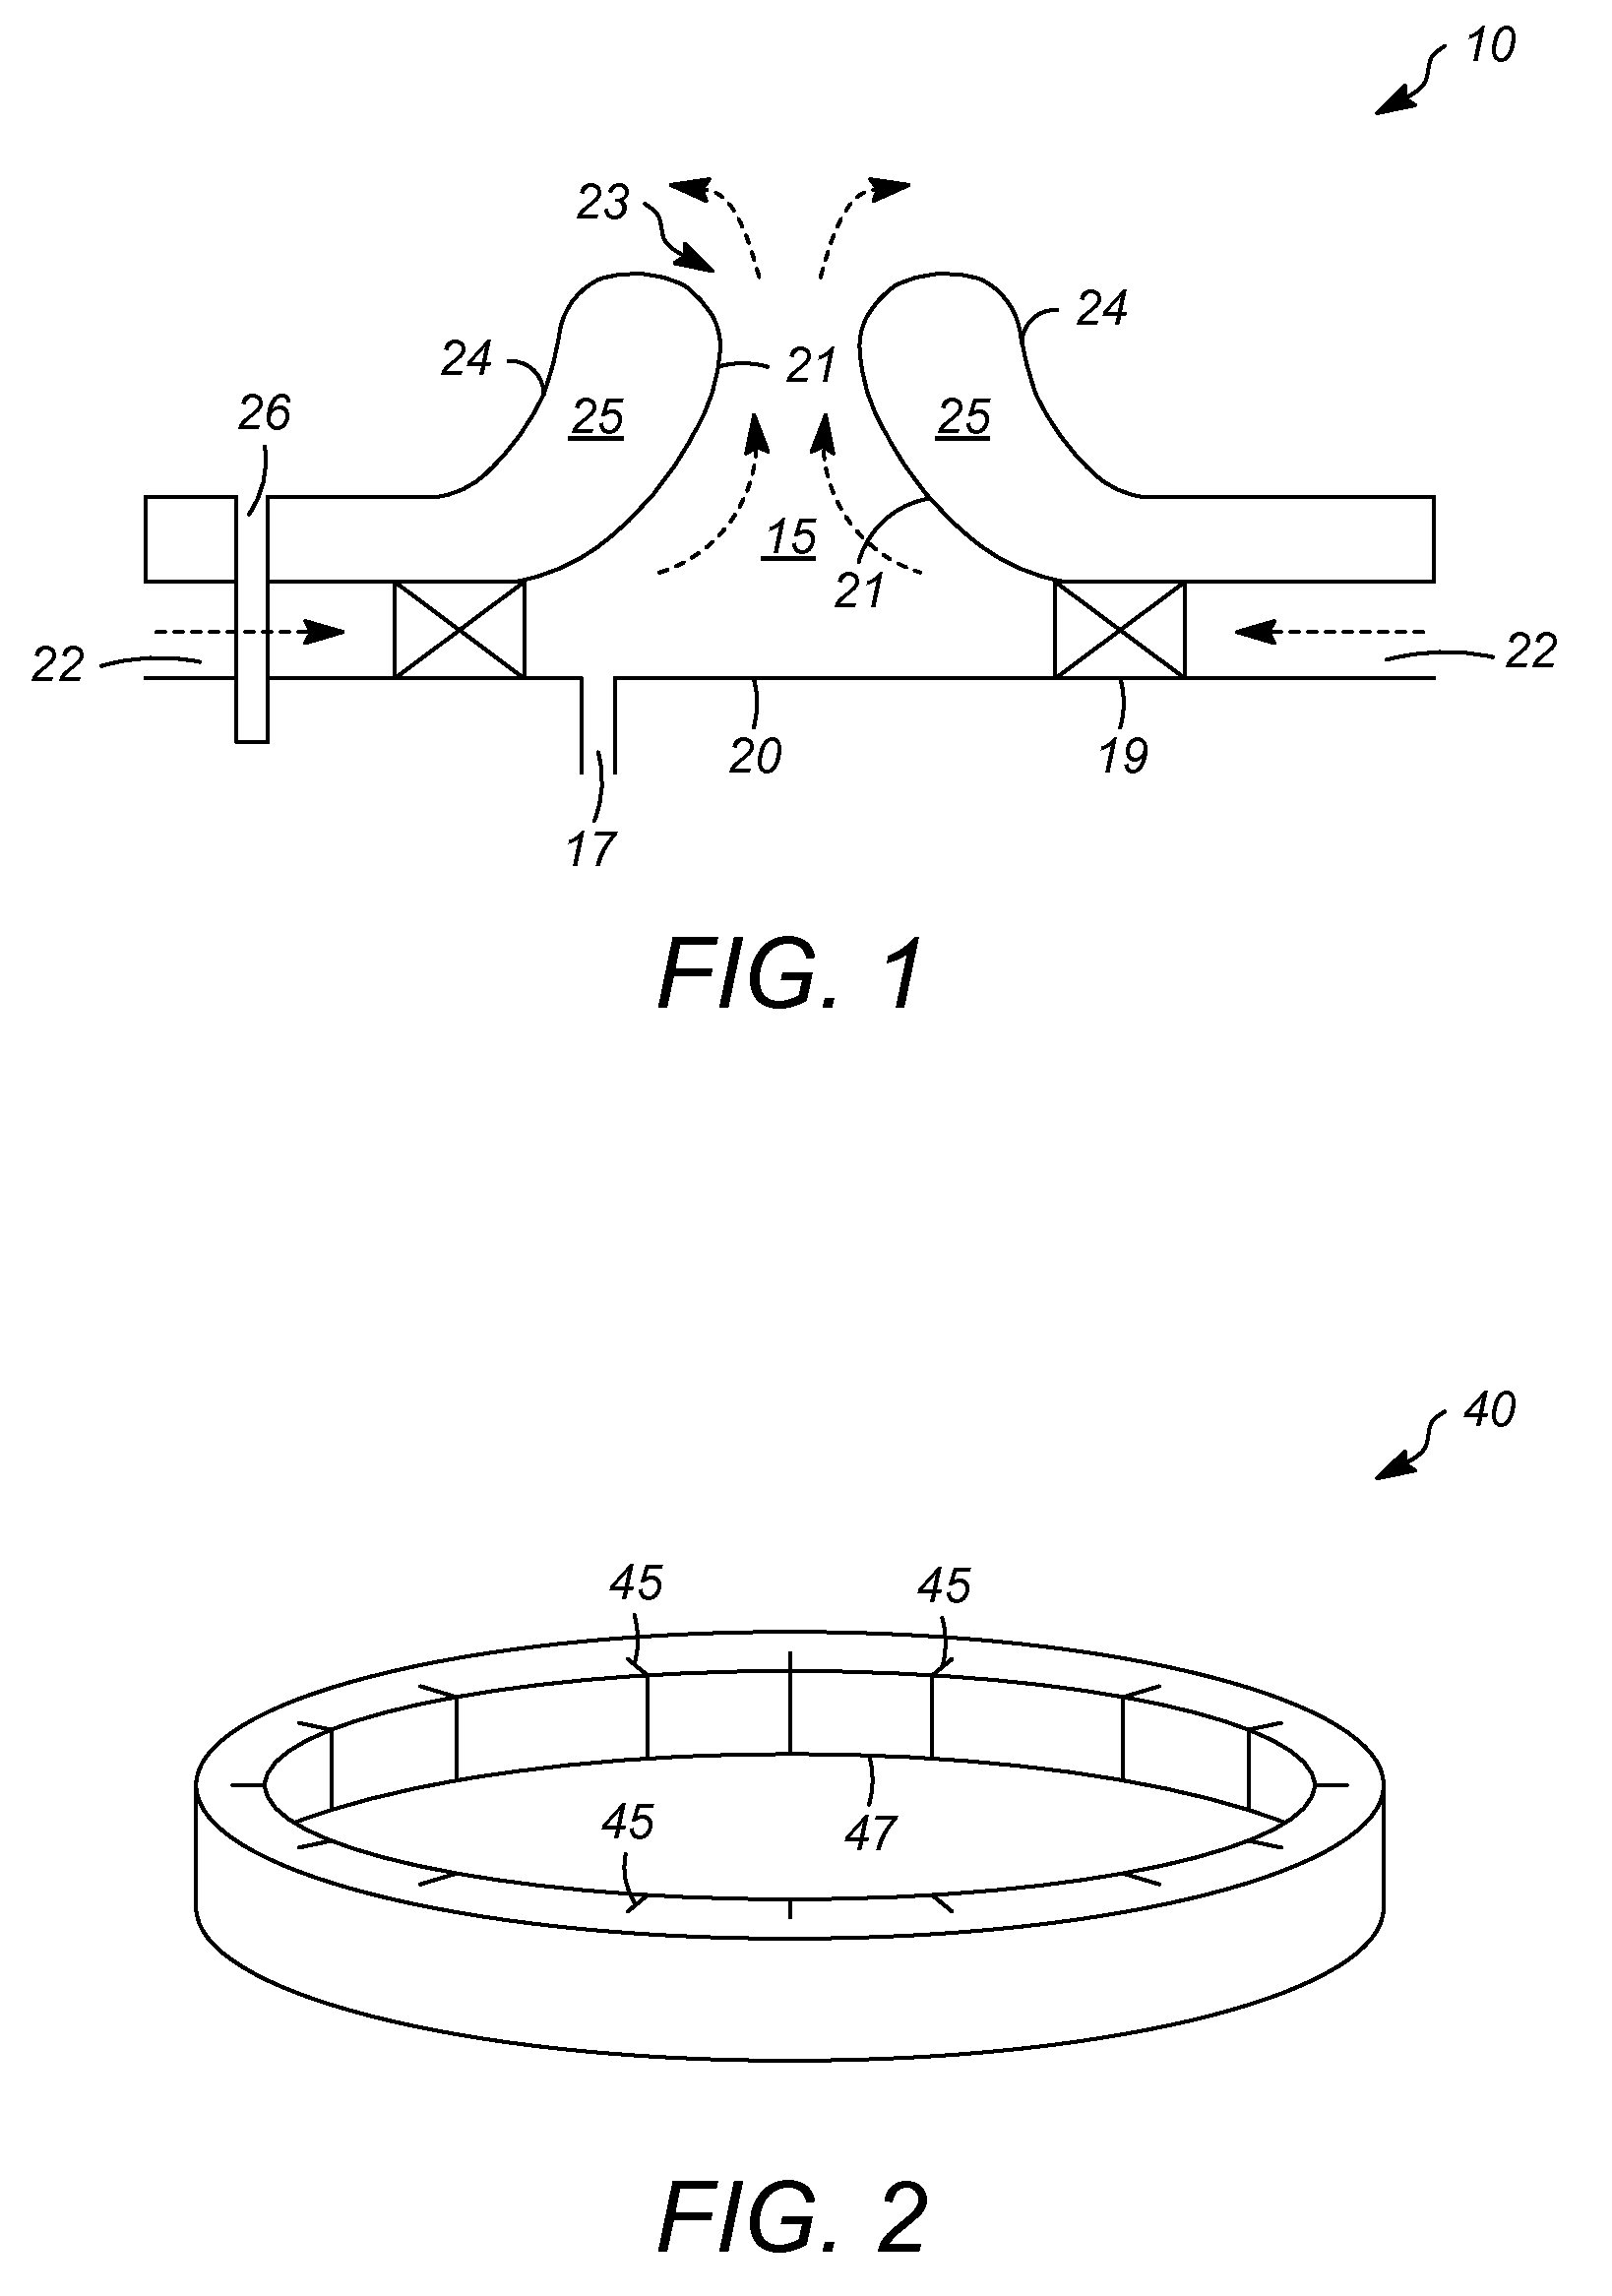 Vapor-liquid contacting apparatuses with vortex contacting stages